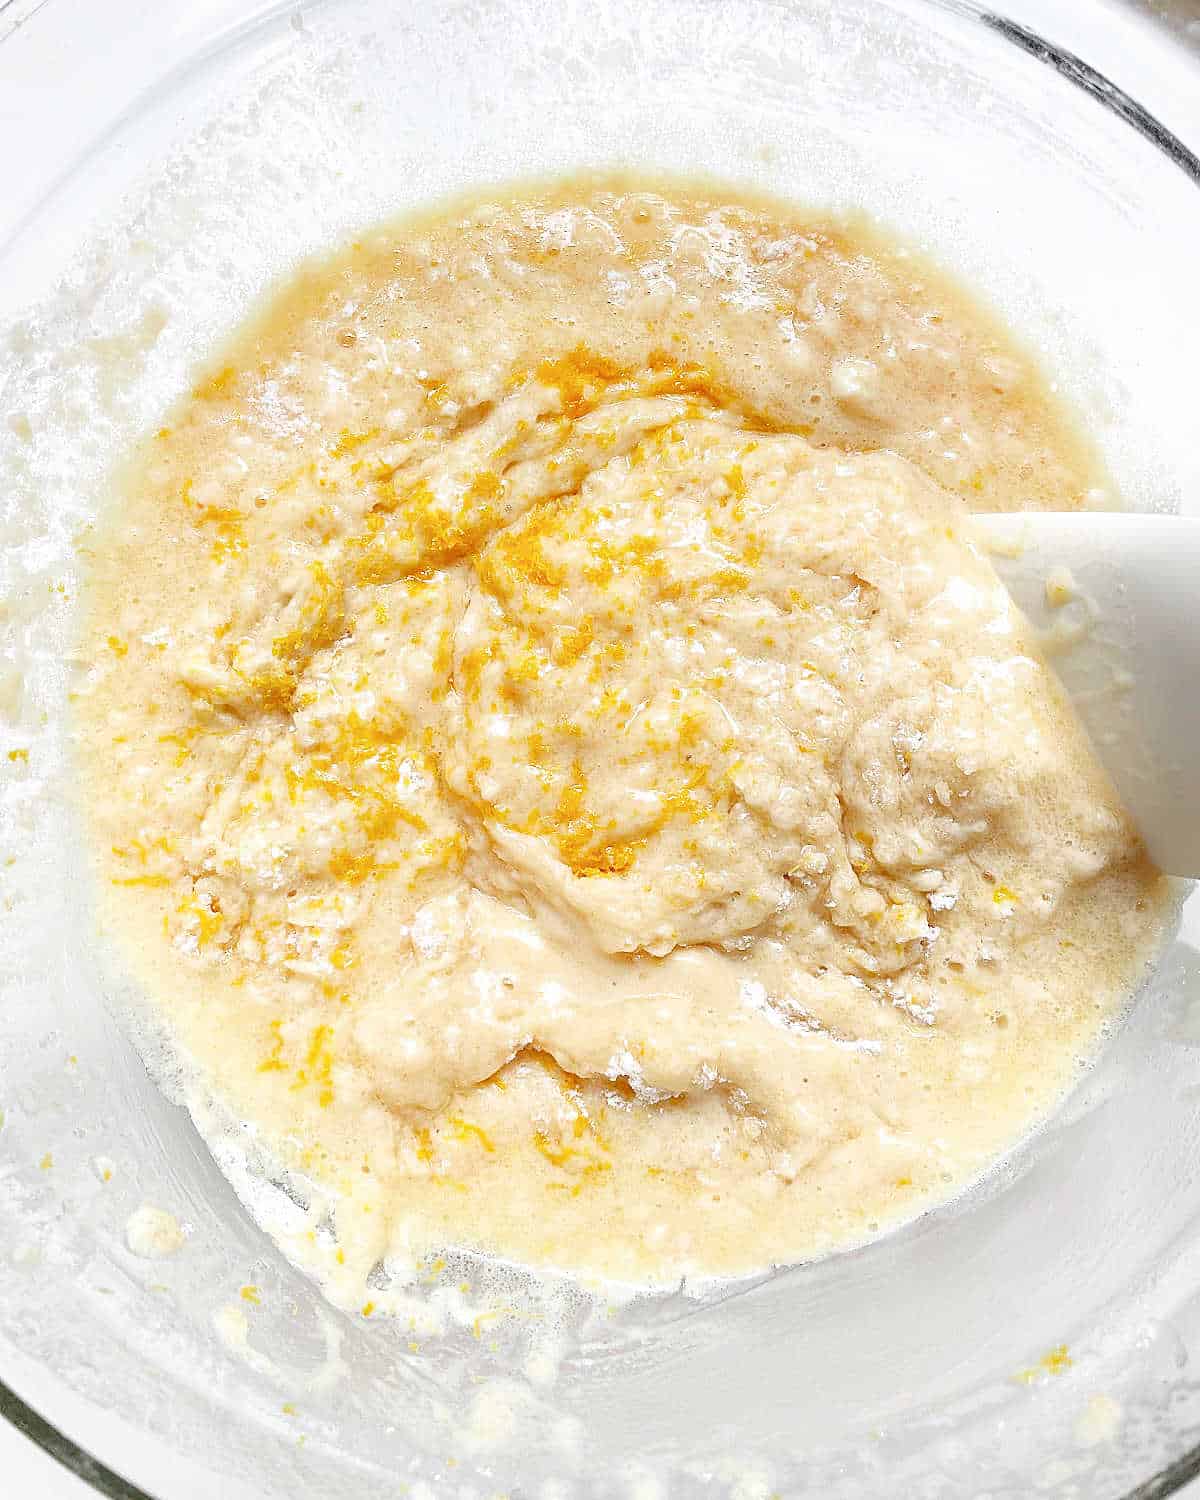 Stirring lemon zest into muffin batter with spatula in a glass bowl.